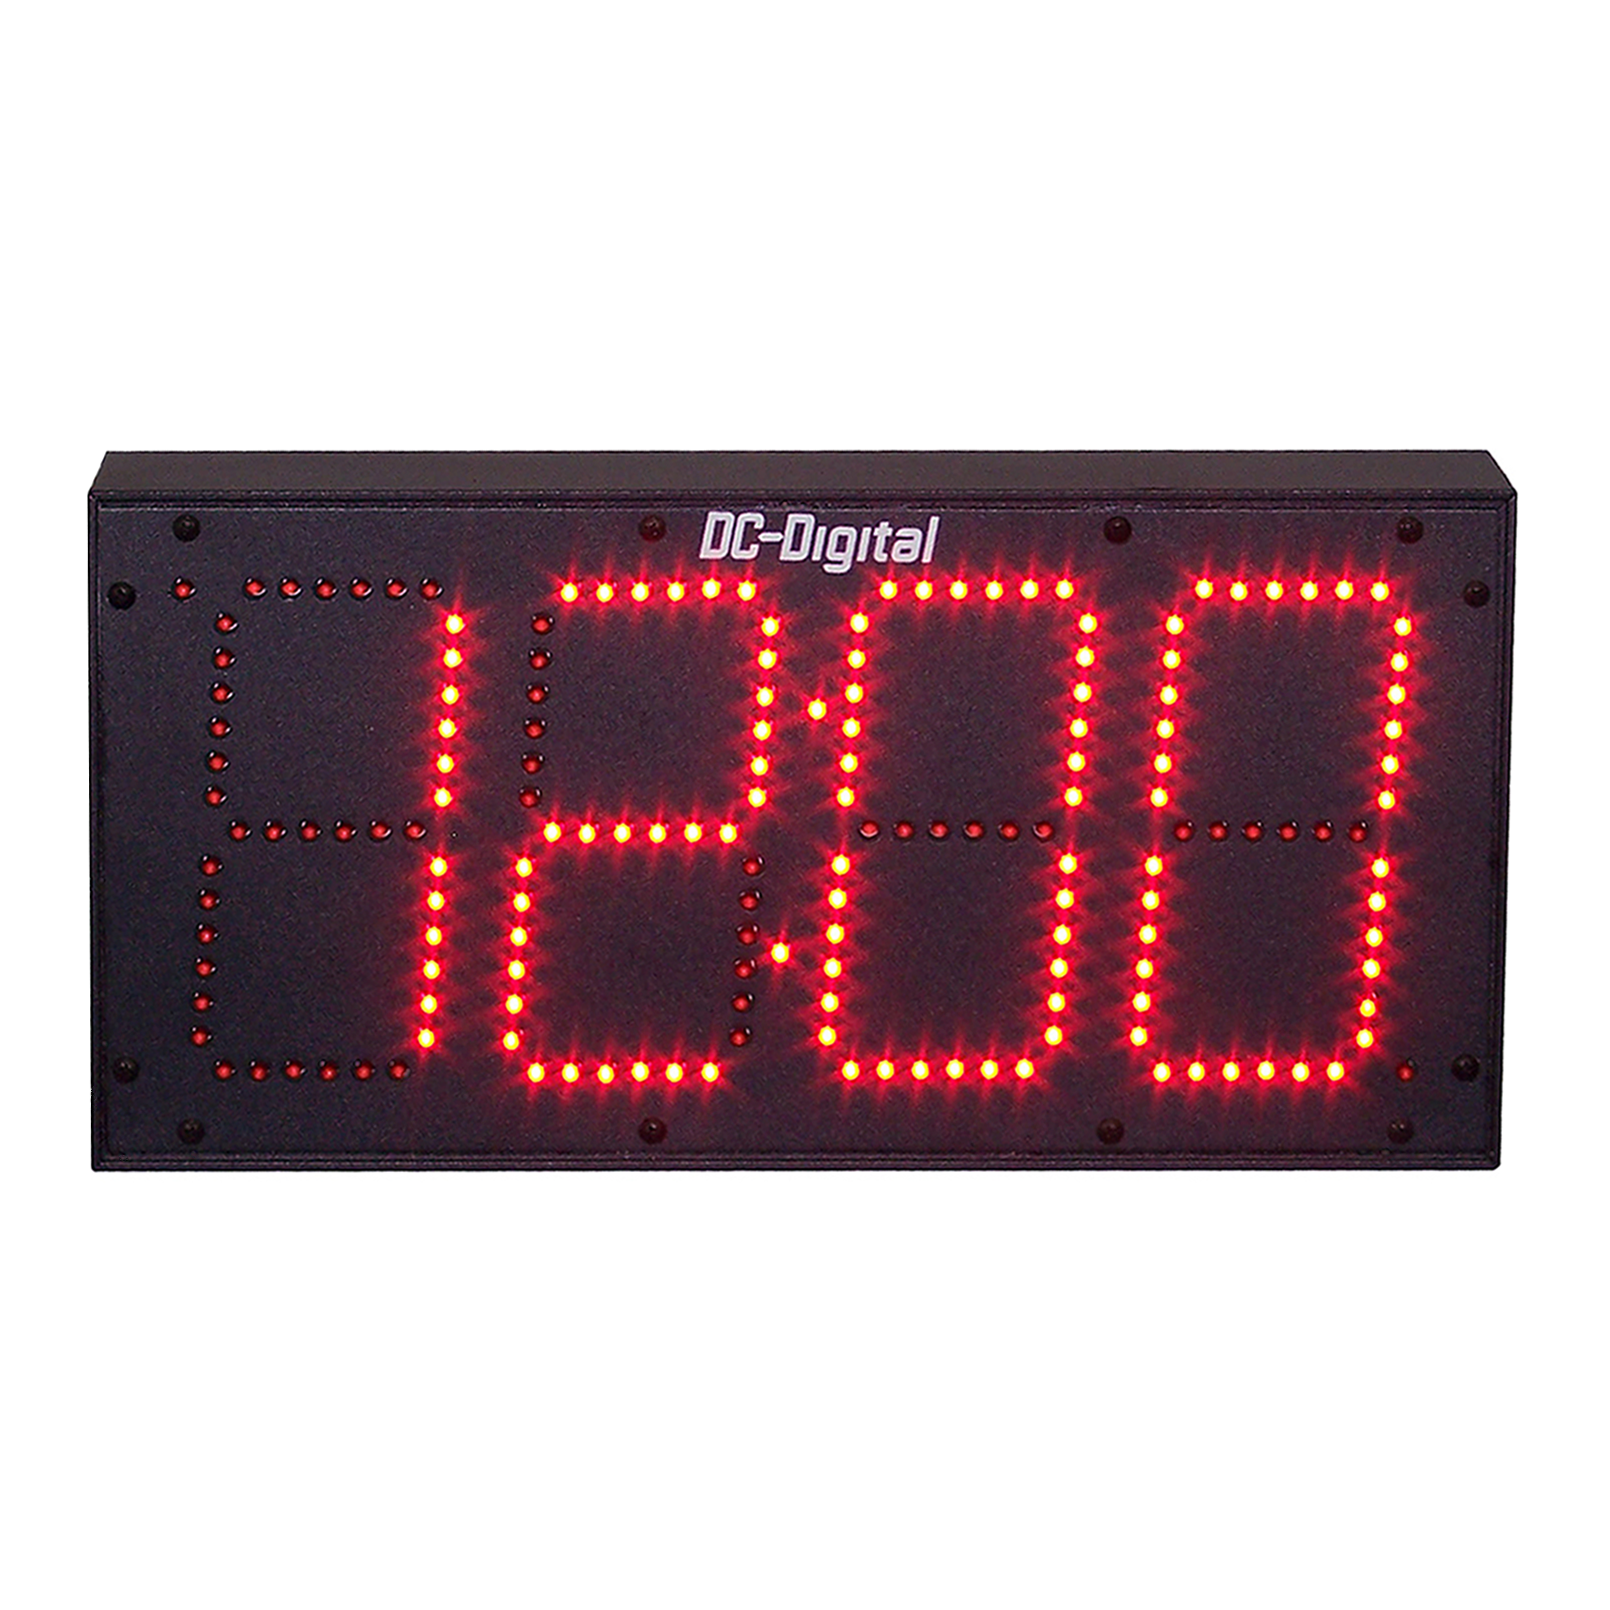 (DC-60-GPS) 6.0 Inch LED Digit, GPS Receiver Synchronization, Atomic Time of Day Digital Clock (OUTDOOR)